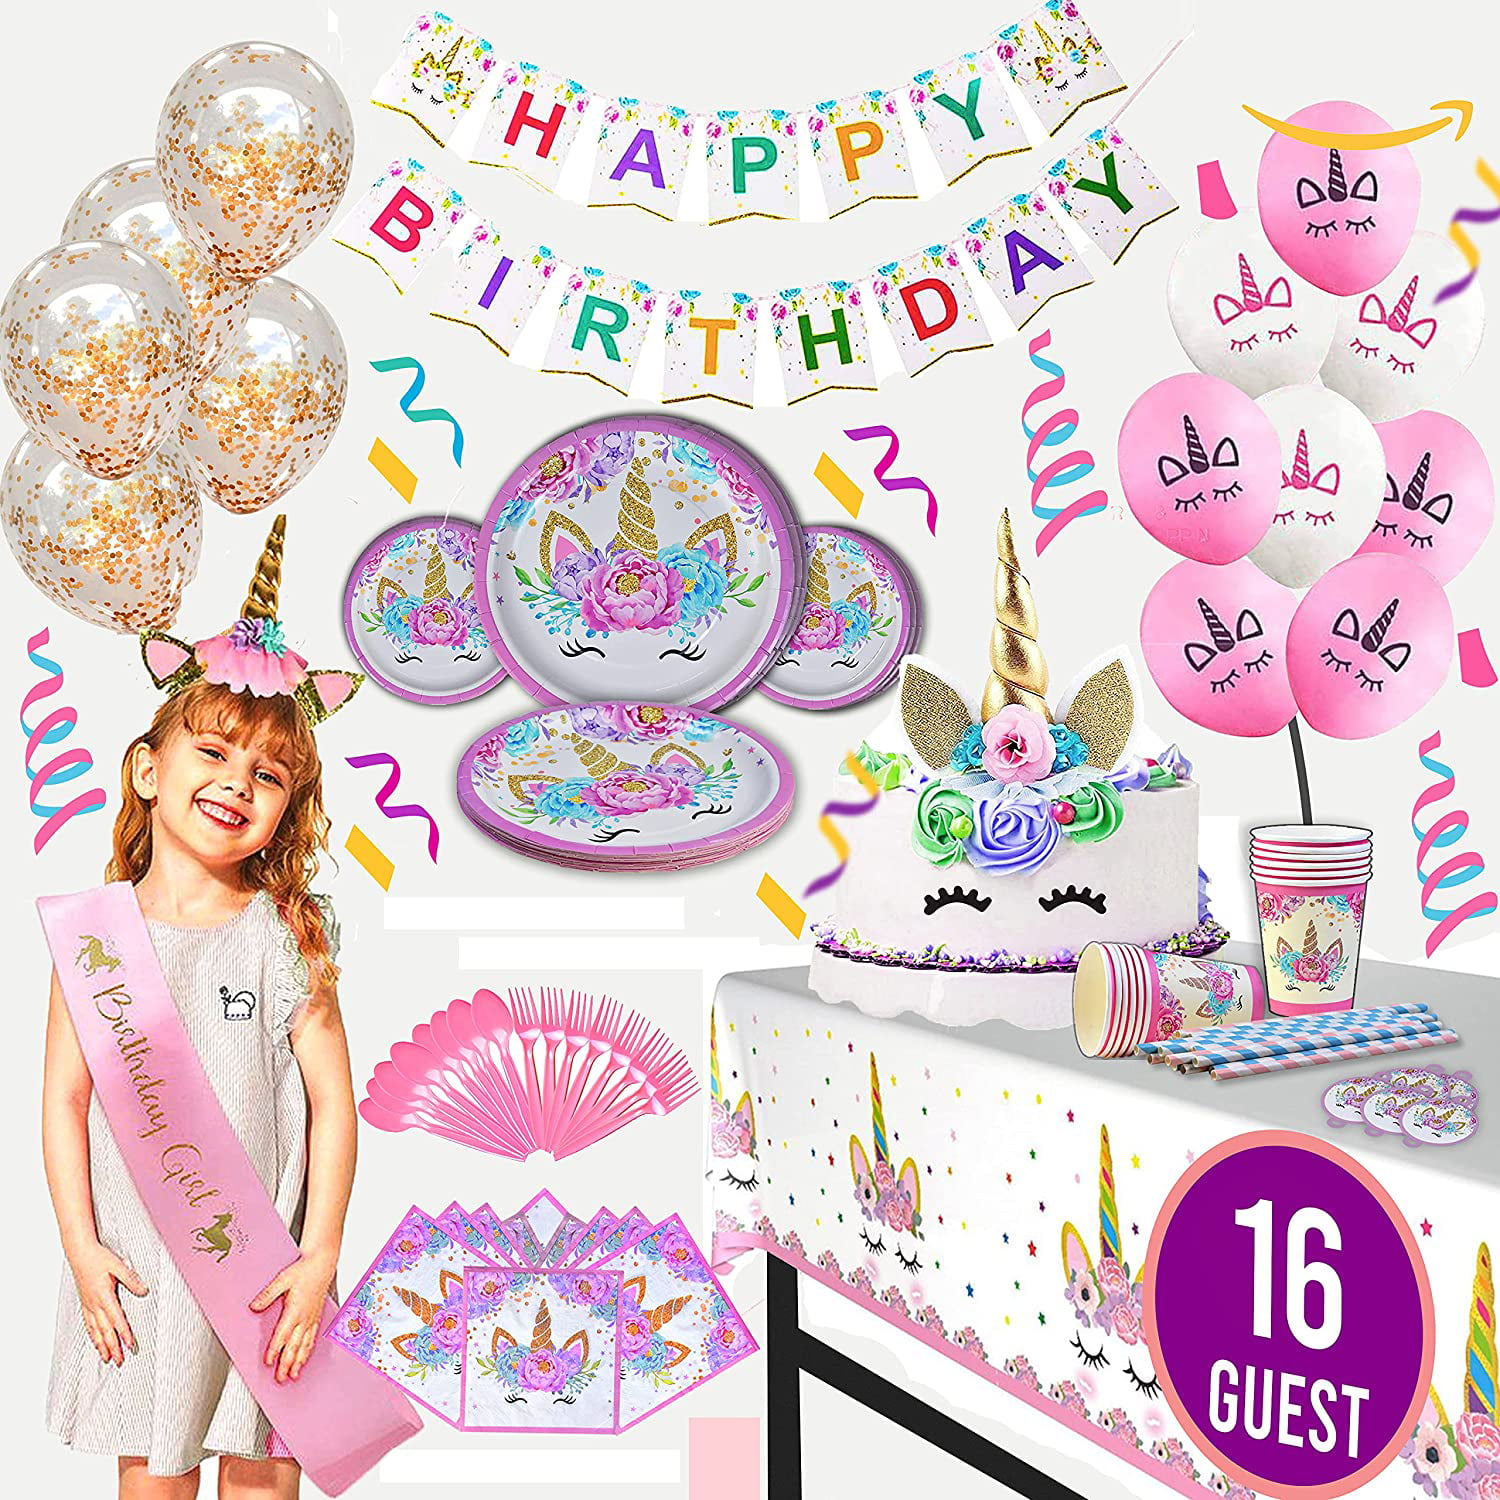 value smash Unicorn Party Supplies Serves 16-Unicorn Decorations Birthday Includes Table Cloth,Happy Banner Forks,Napkins,Straws,Unicorn Theme Balloons by ValueSmash Pink Paper Plates,Cups 